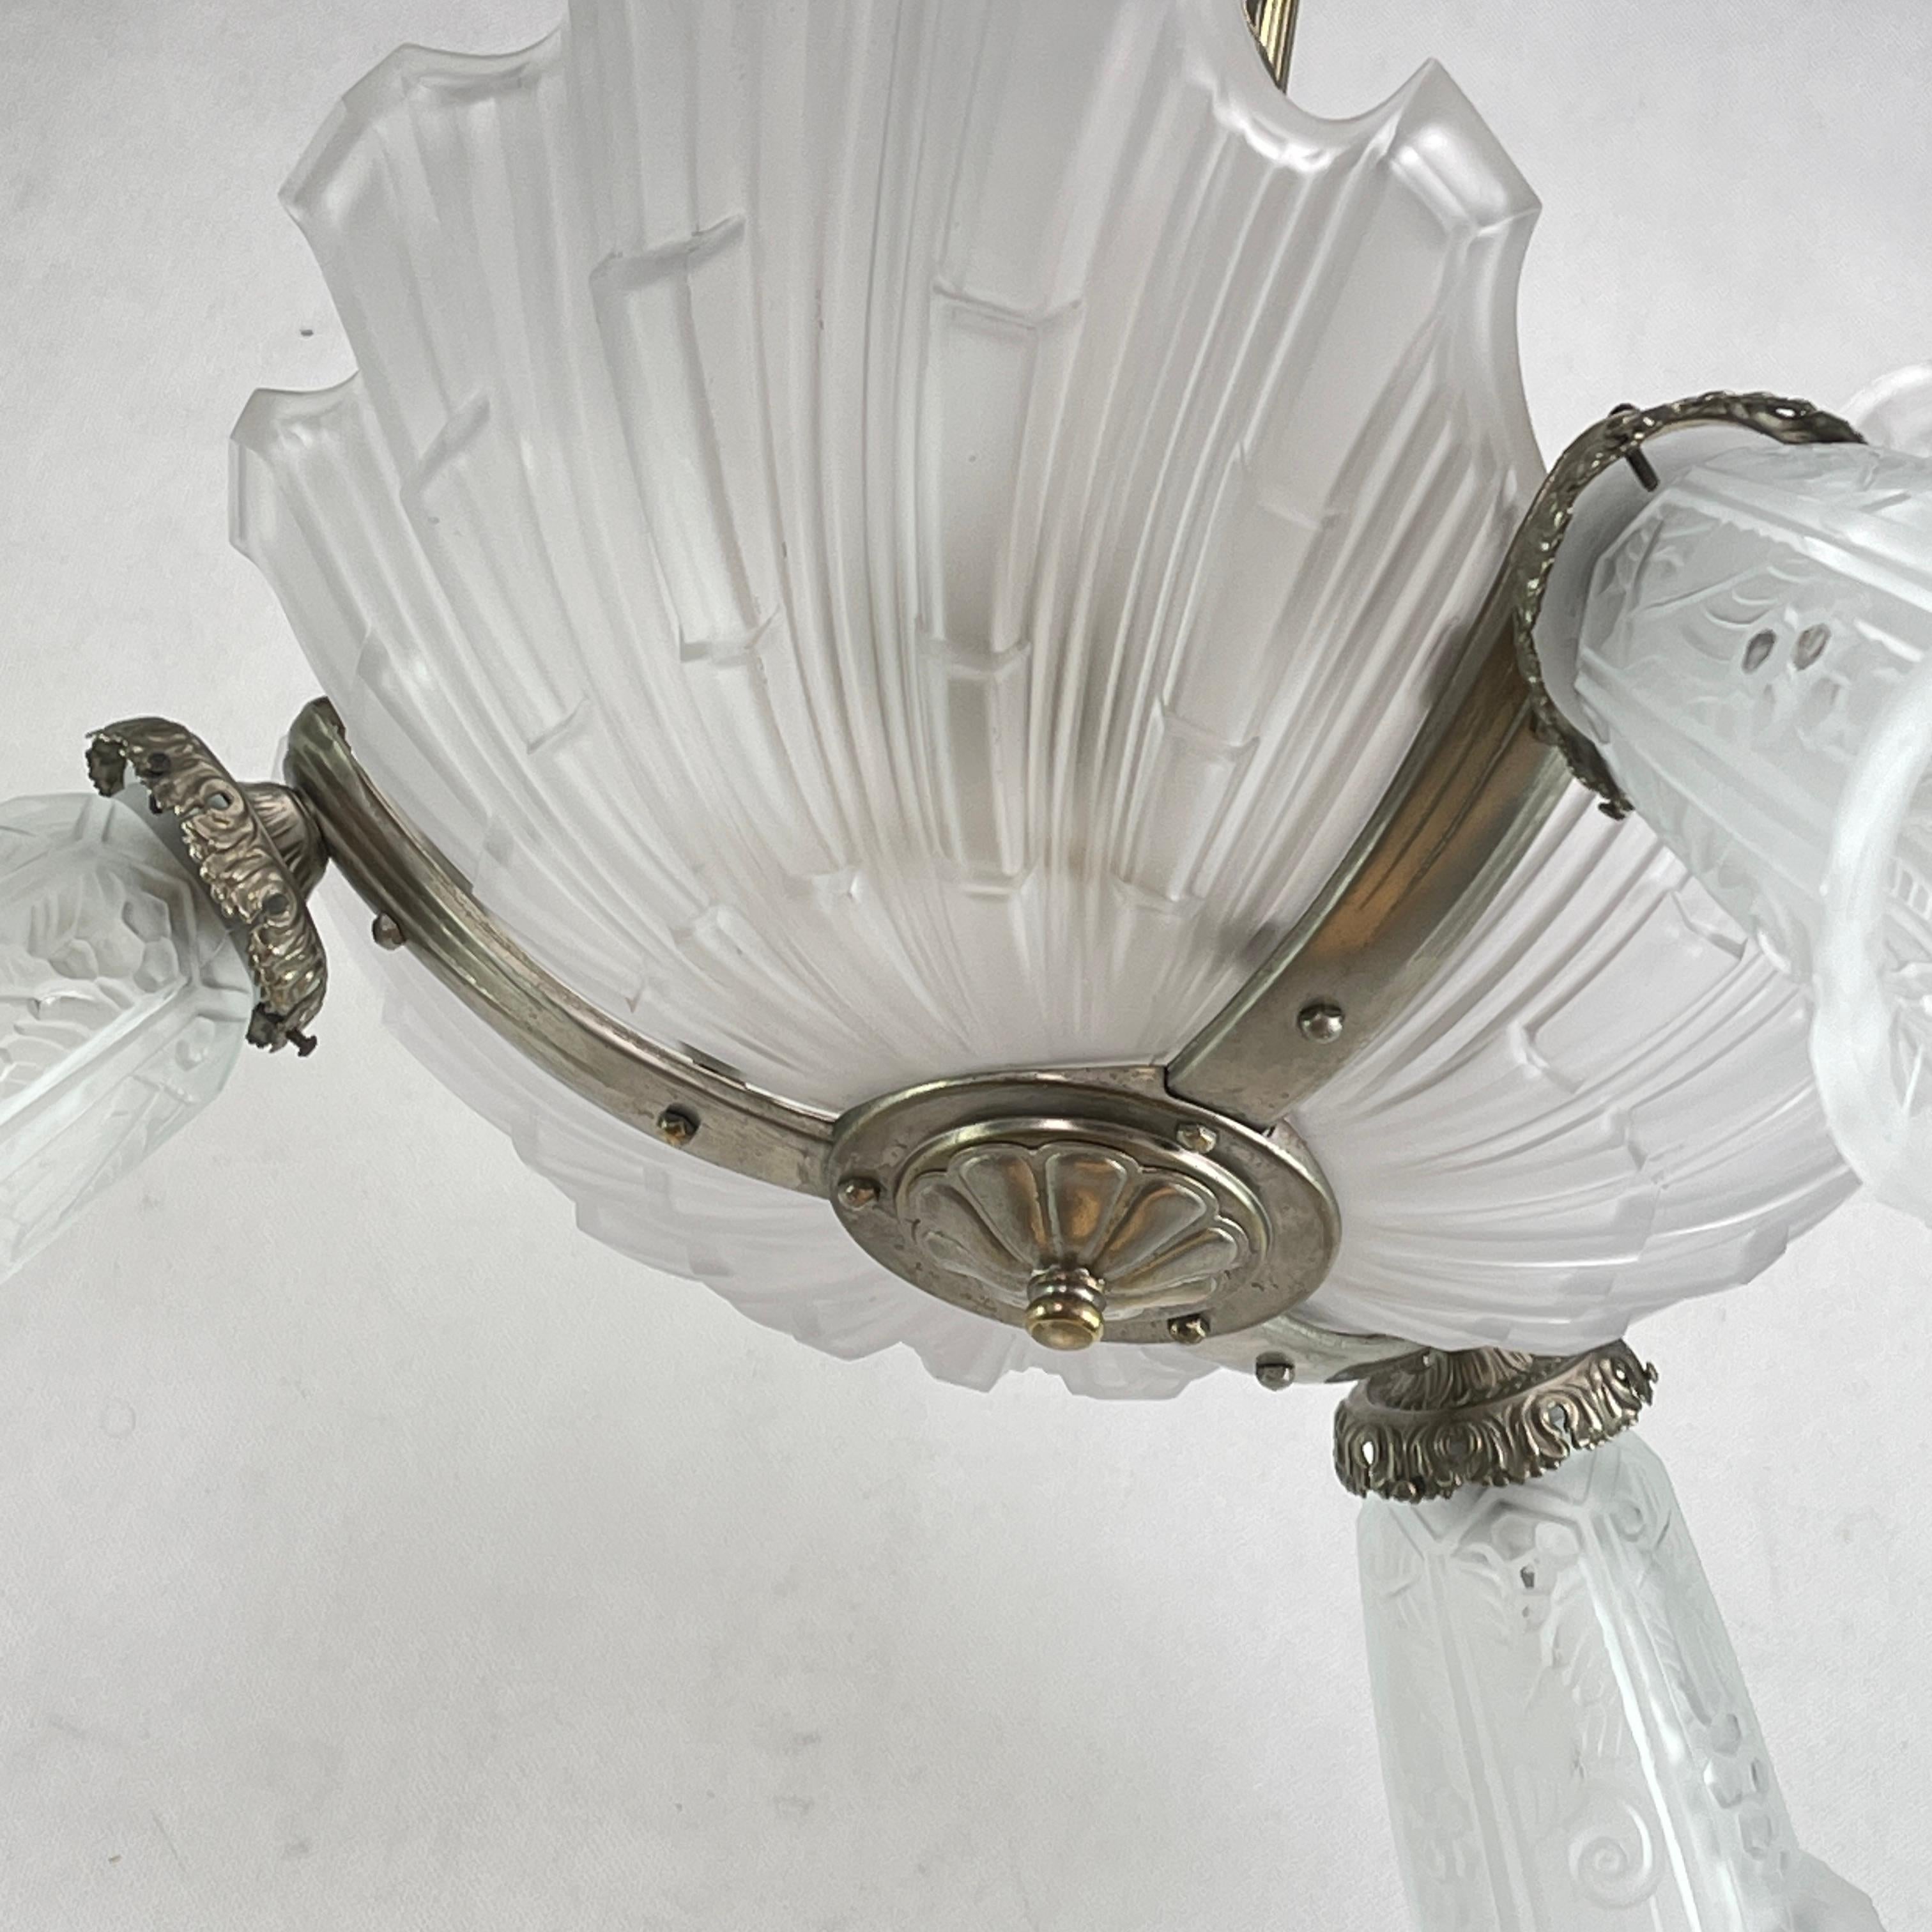 French ART DECO Shell Lamp by Maynadier Chandelier Hanging Lamp Ceiling Lamp, 1930s